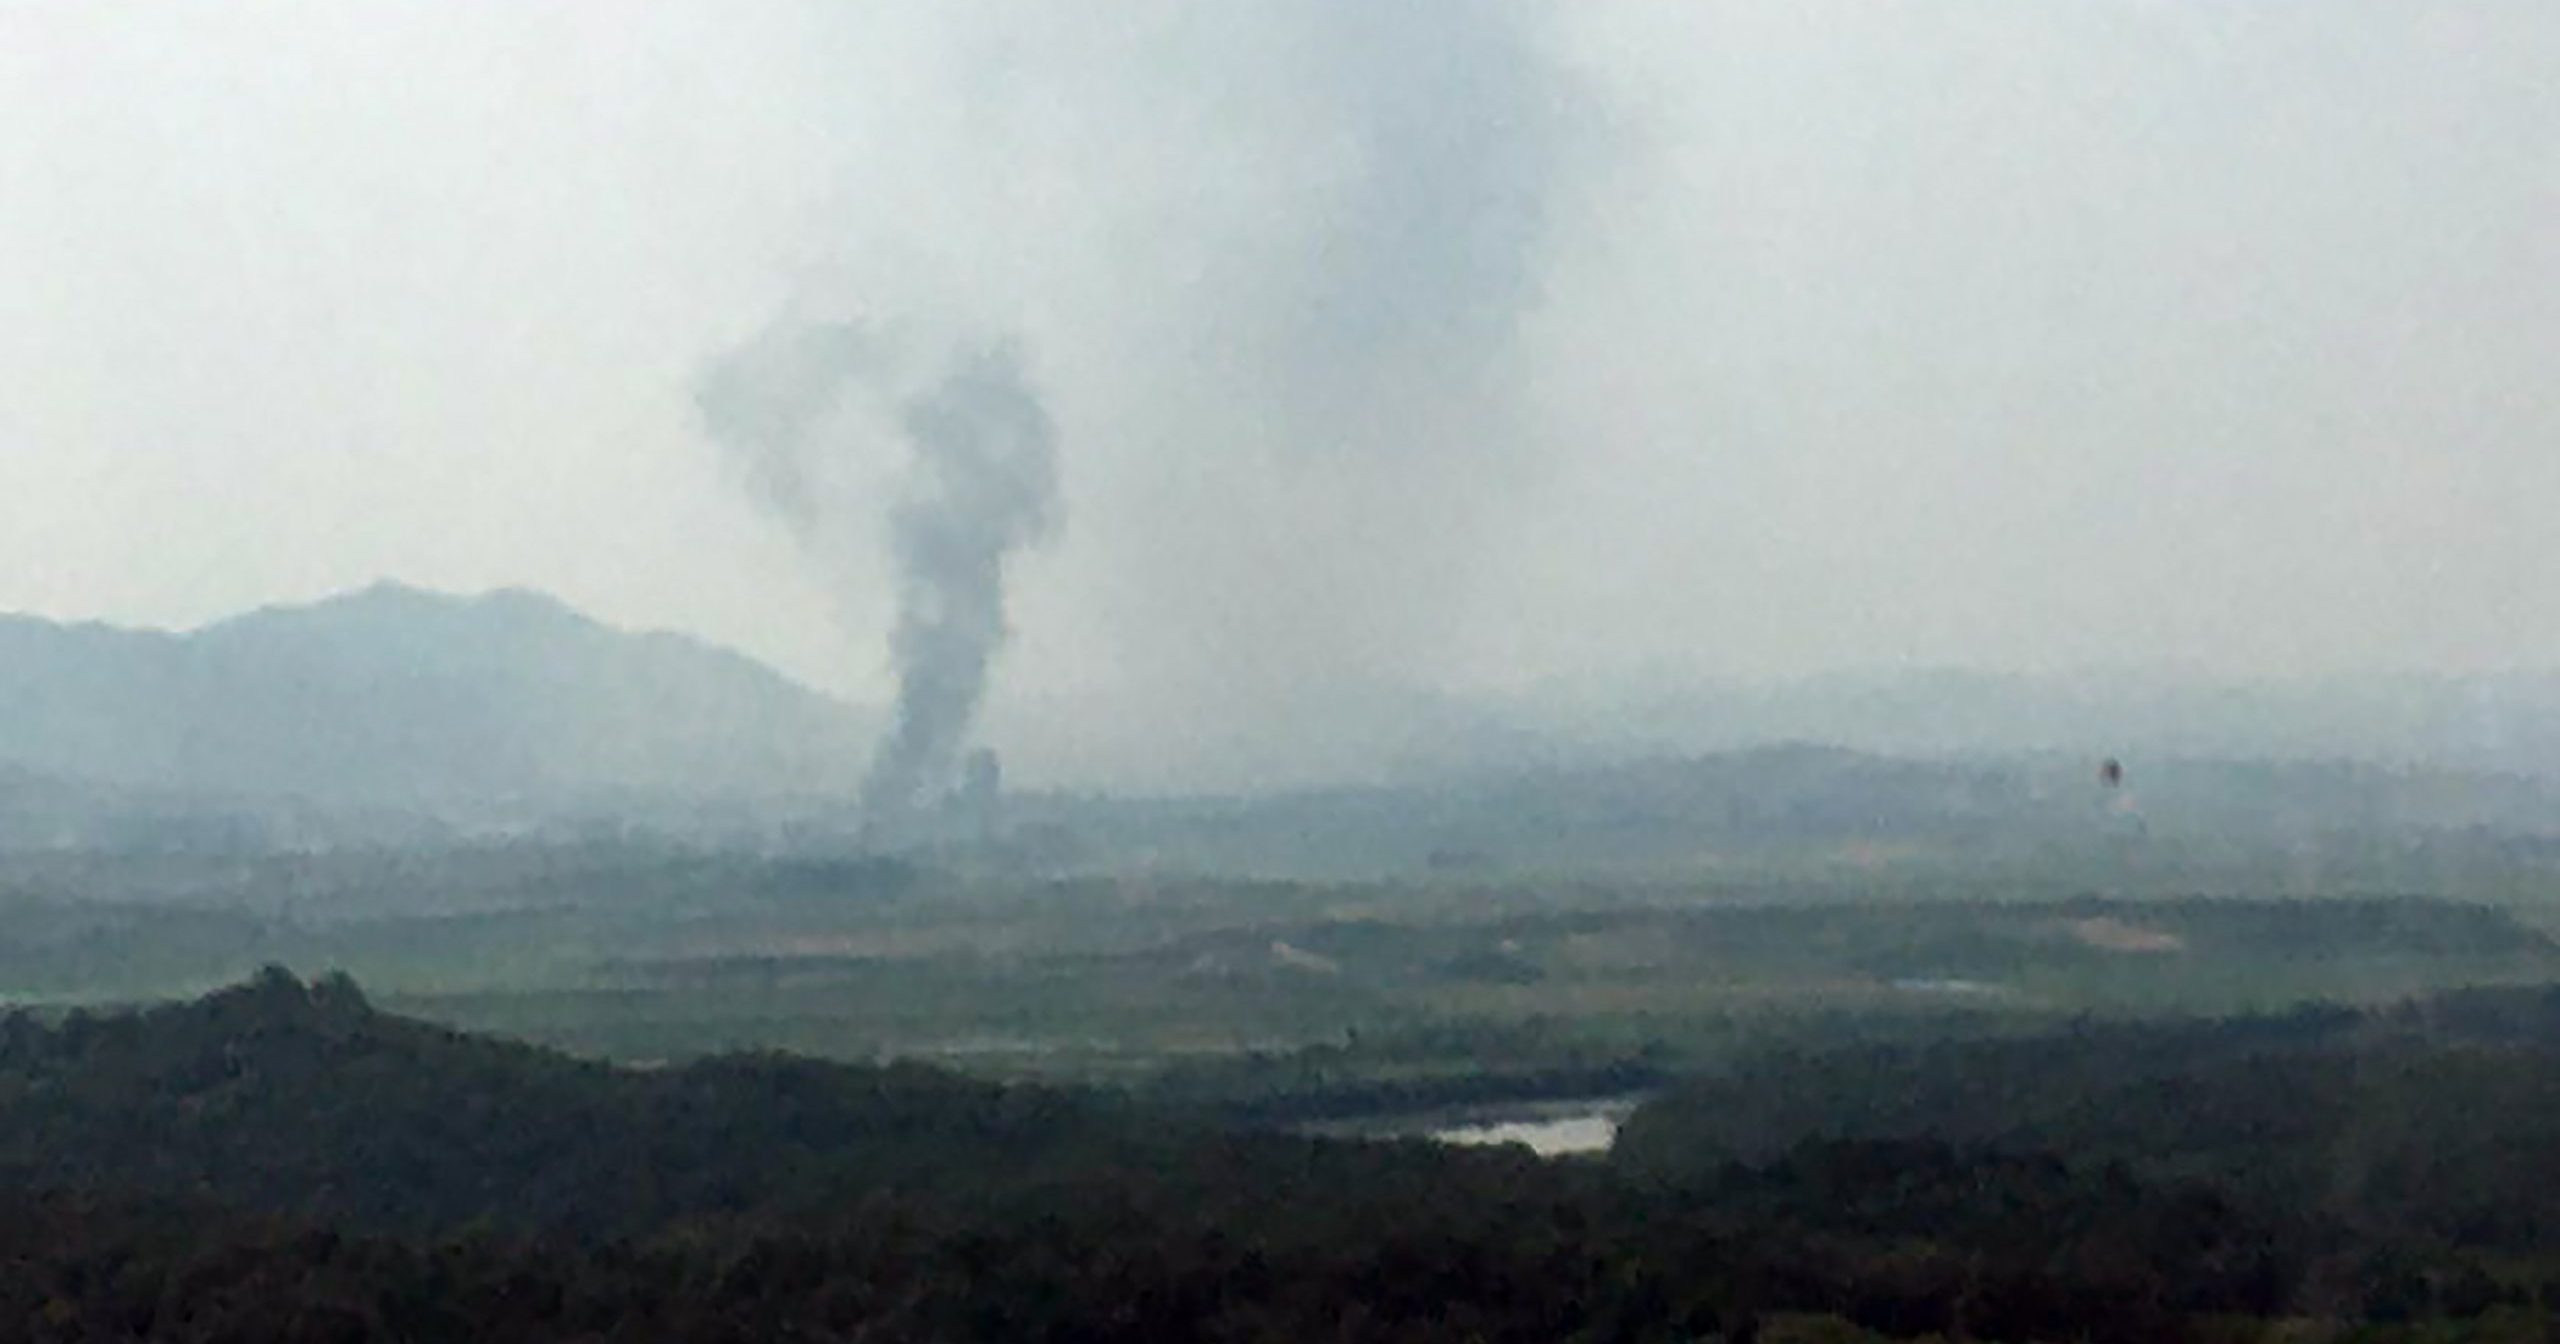 Smoke rises in the North Korean border town of Kaesong, seen from Paju, South Korea, on June 16, 2020.